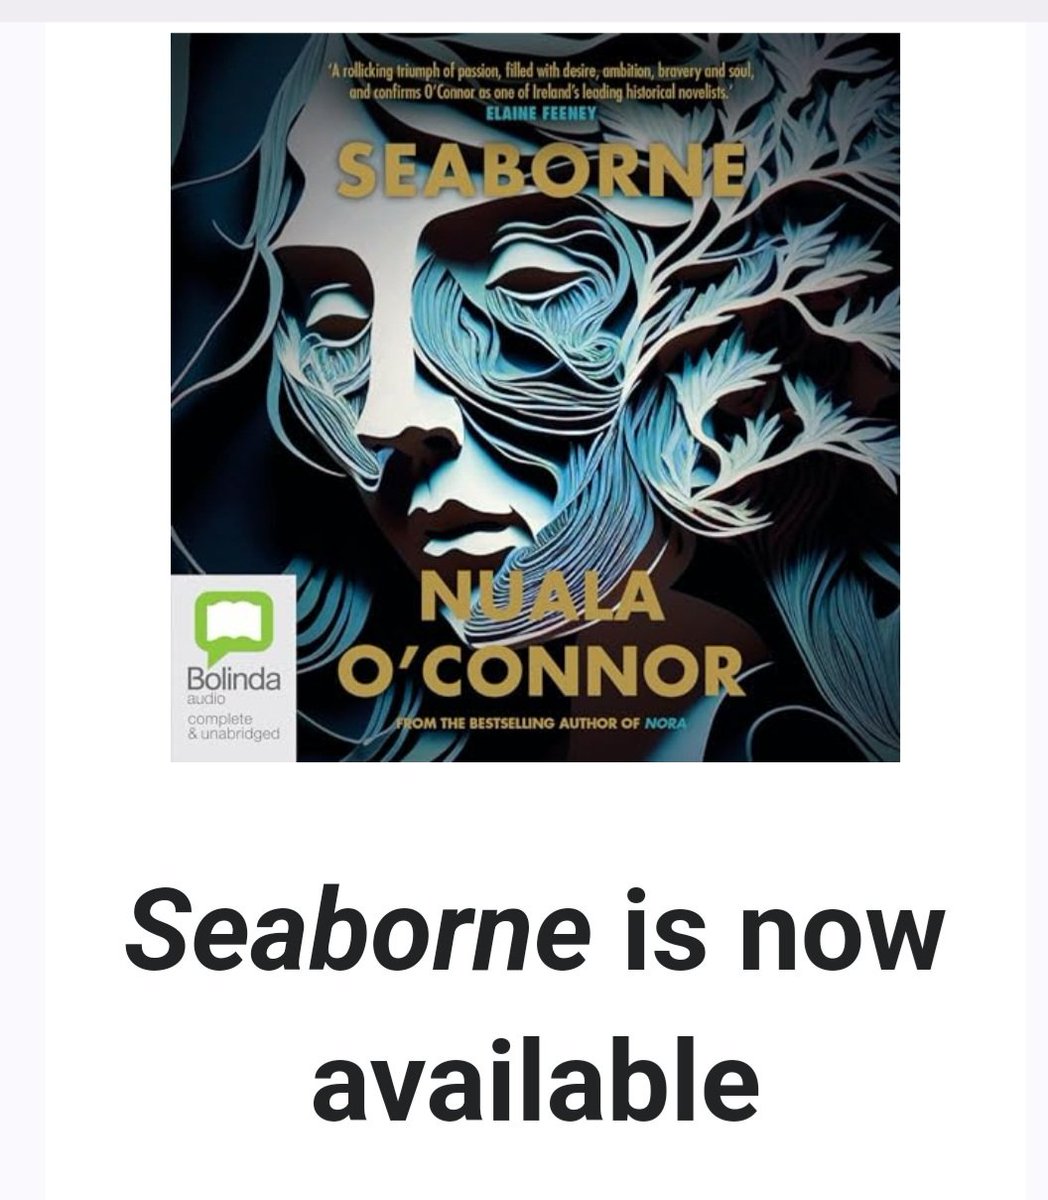 Audiobook publication day! Seaborne is out now from @Bolindaaudio & available on @audible_com or wherever you listen. #Seaborne #AnneBonny